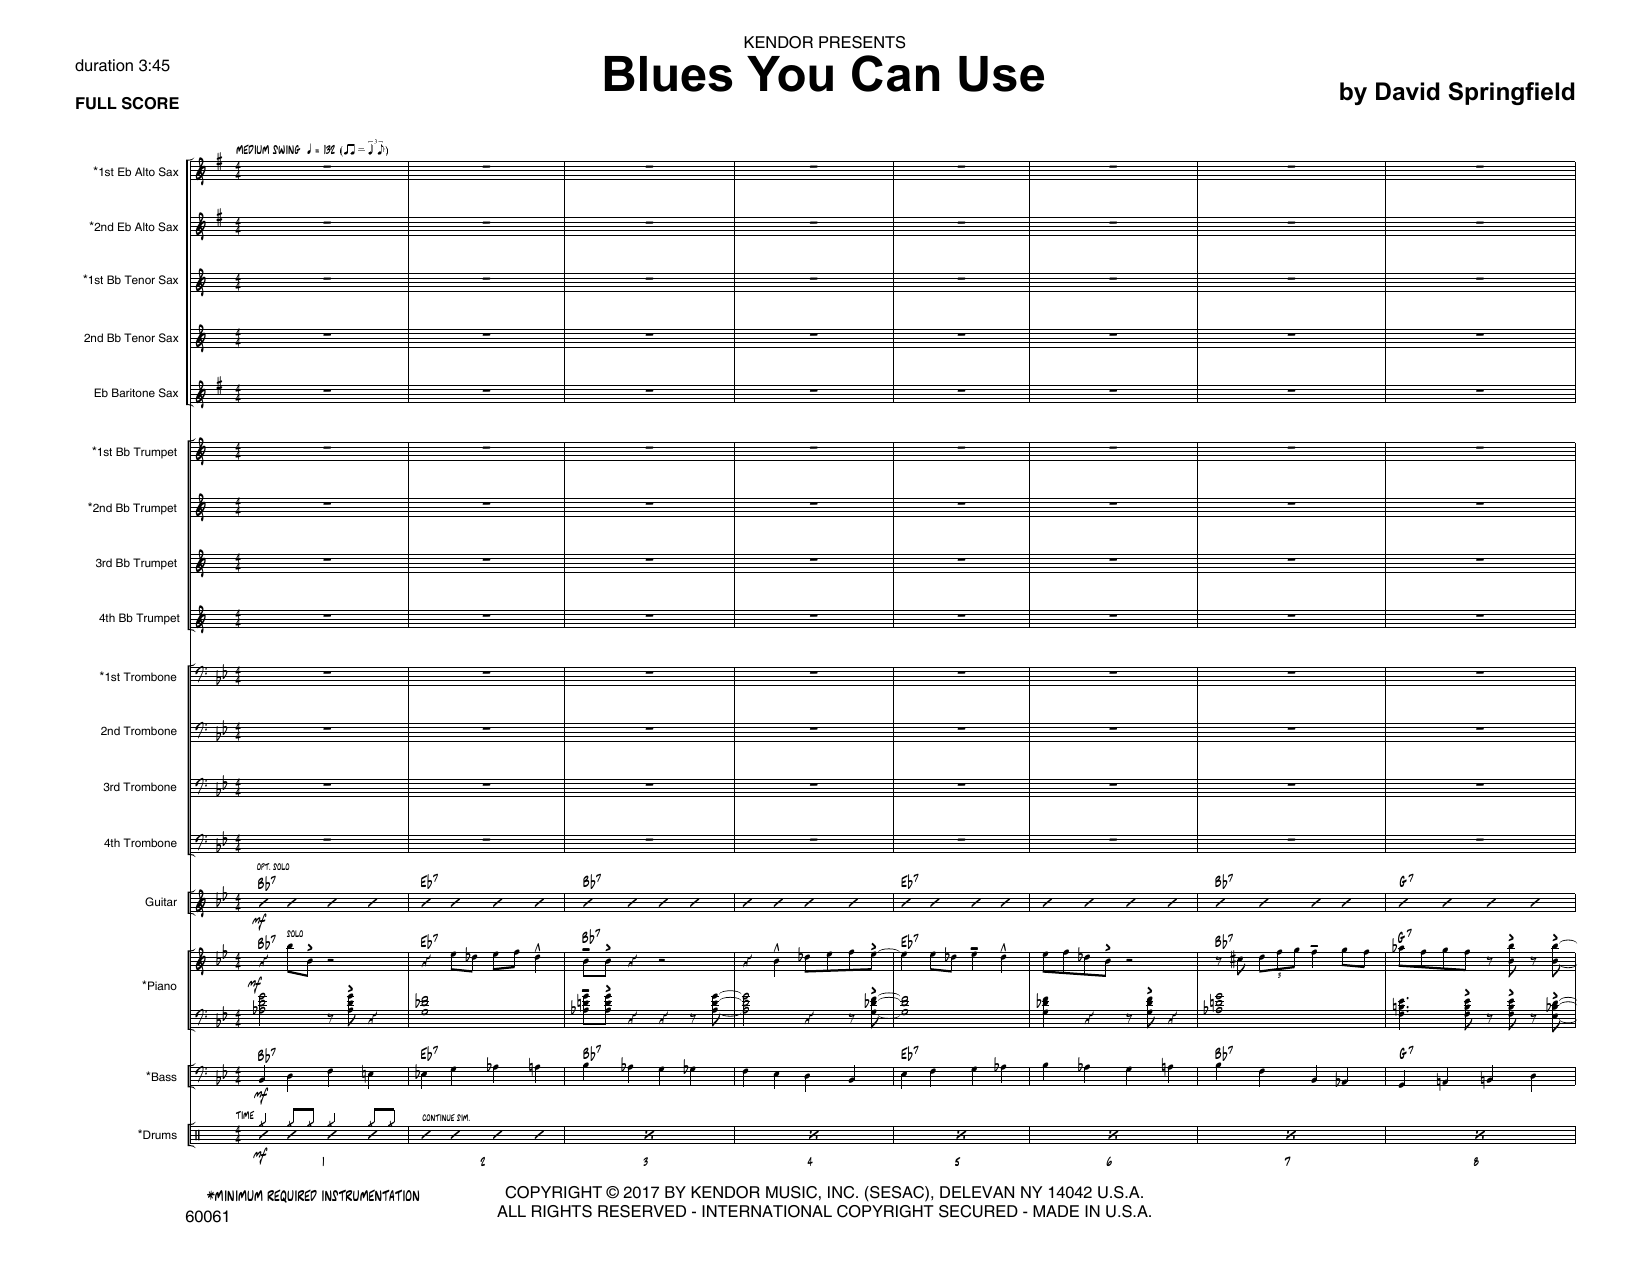 Download David Springfield Blues You Can Use - Full Score Sheet Music